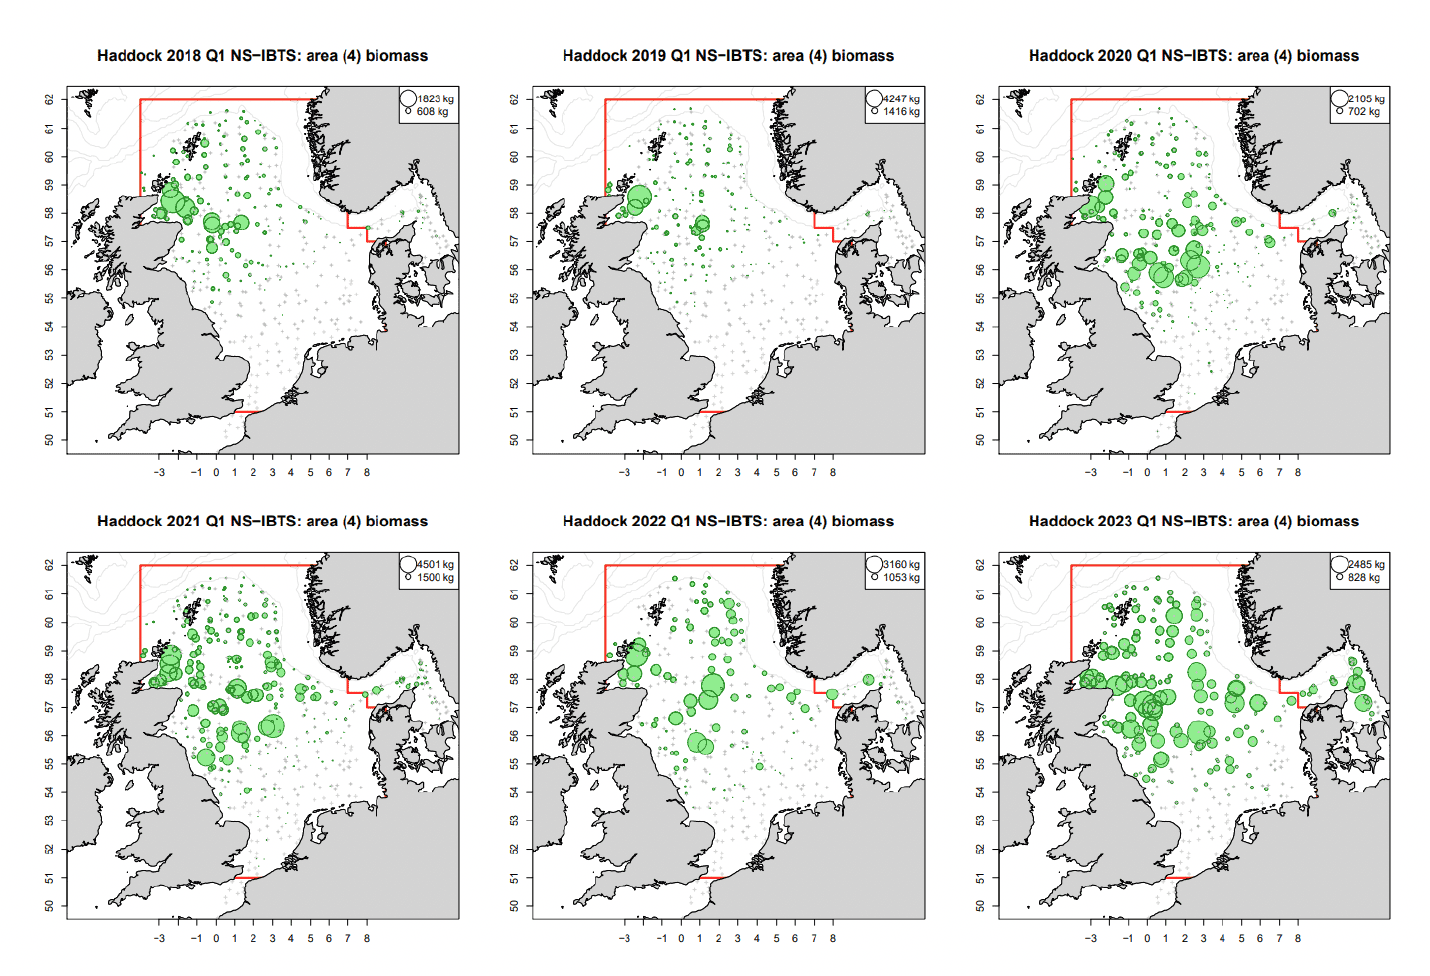 Distribution map for survey haddock biomass in Quarter 1 in the North Sea (area 4). There are 6 bubble plots one per year (2018-2023). The plots indicate larger biomass bubbles in the northern North Sea.